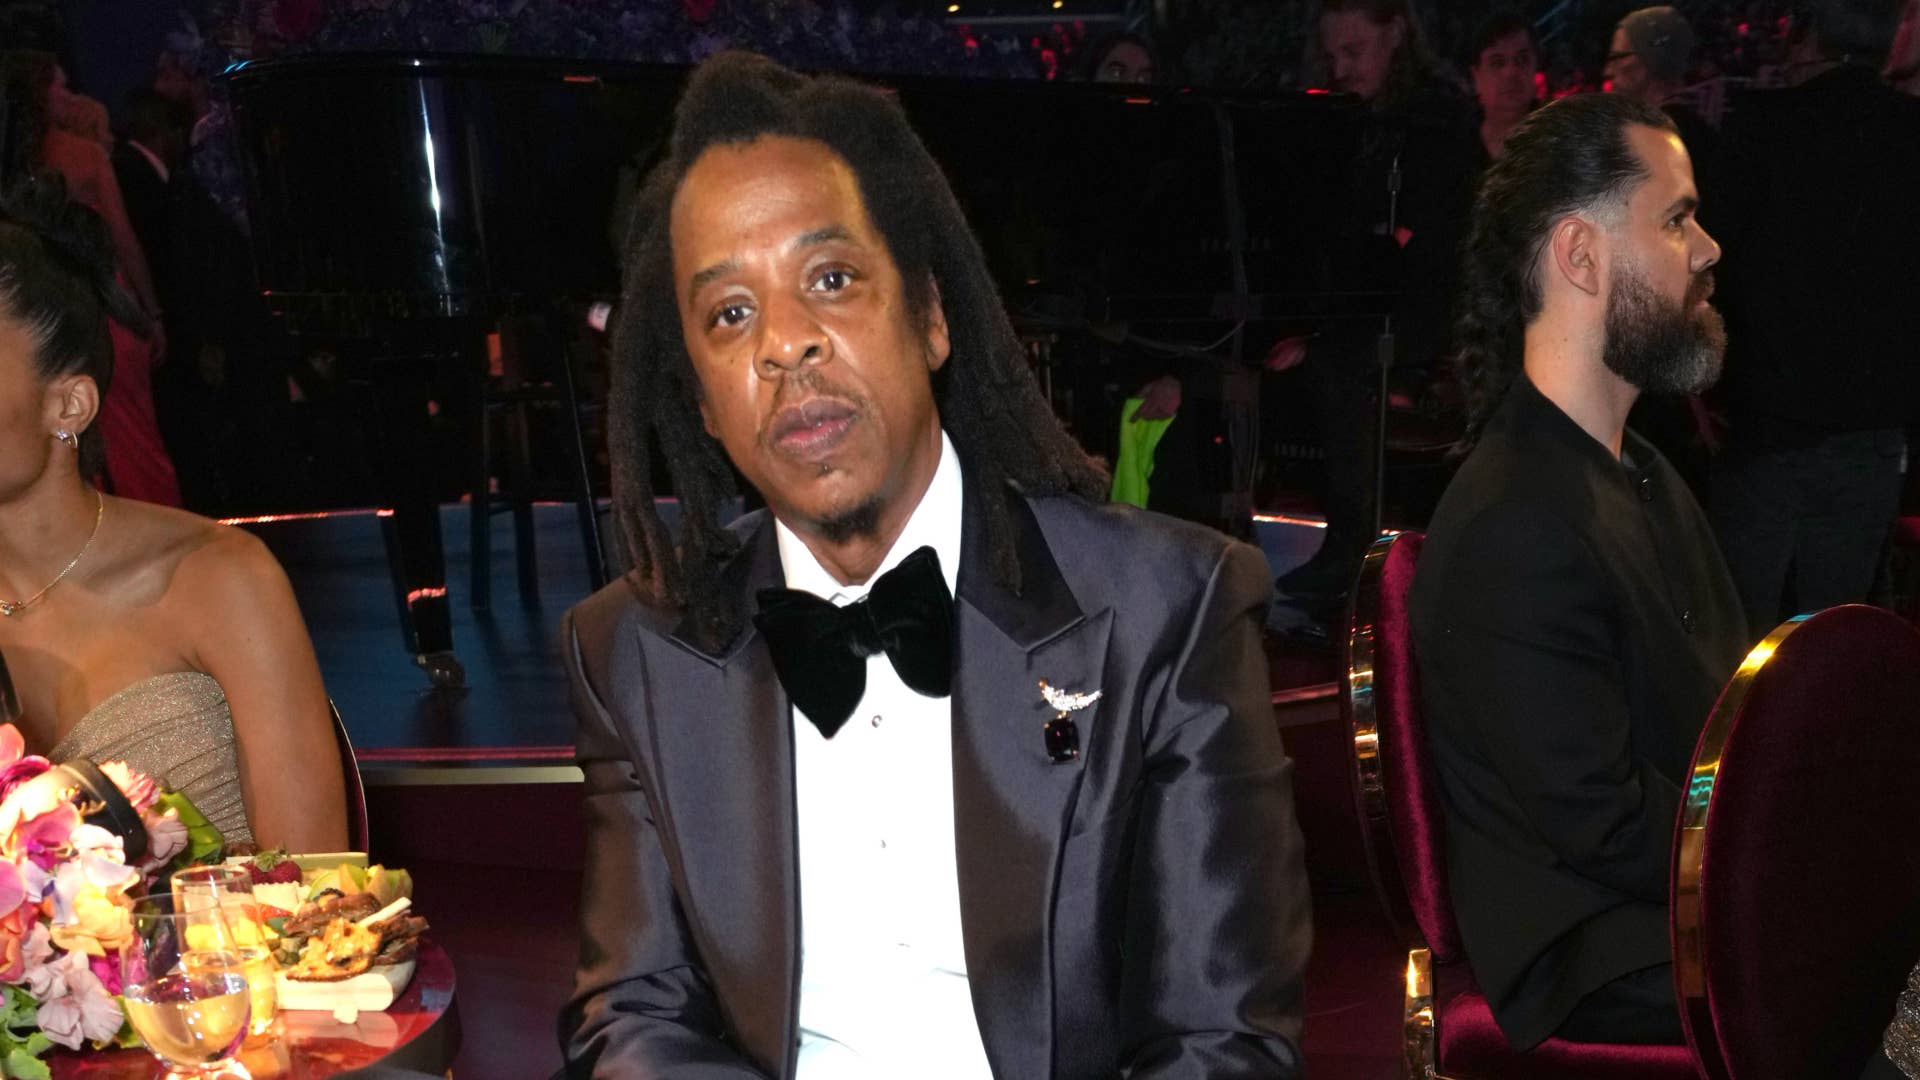 jay z is seen at grammys ceremony